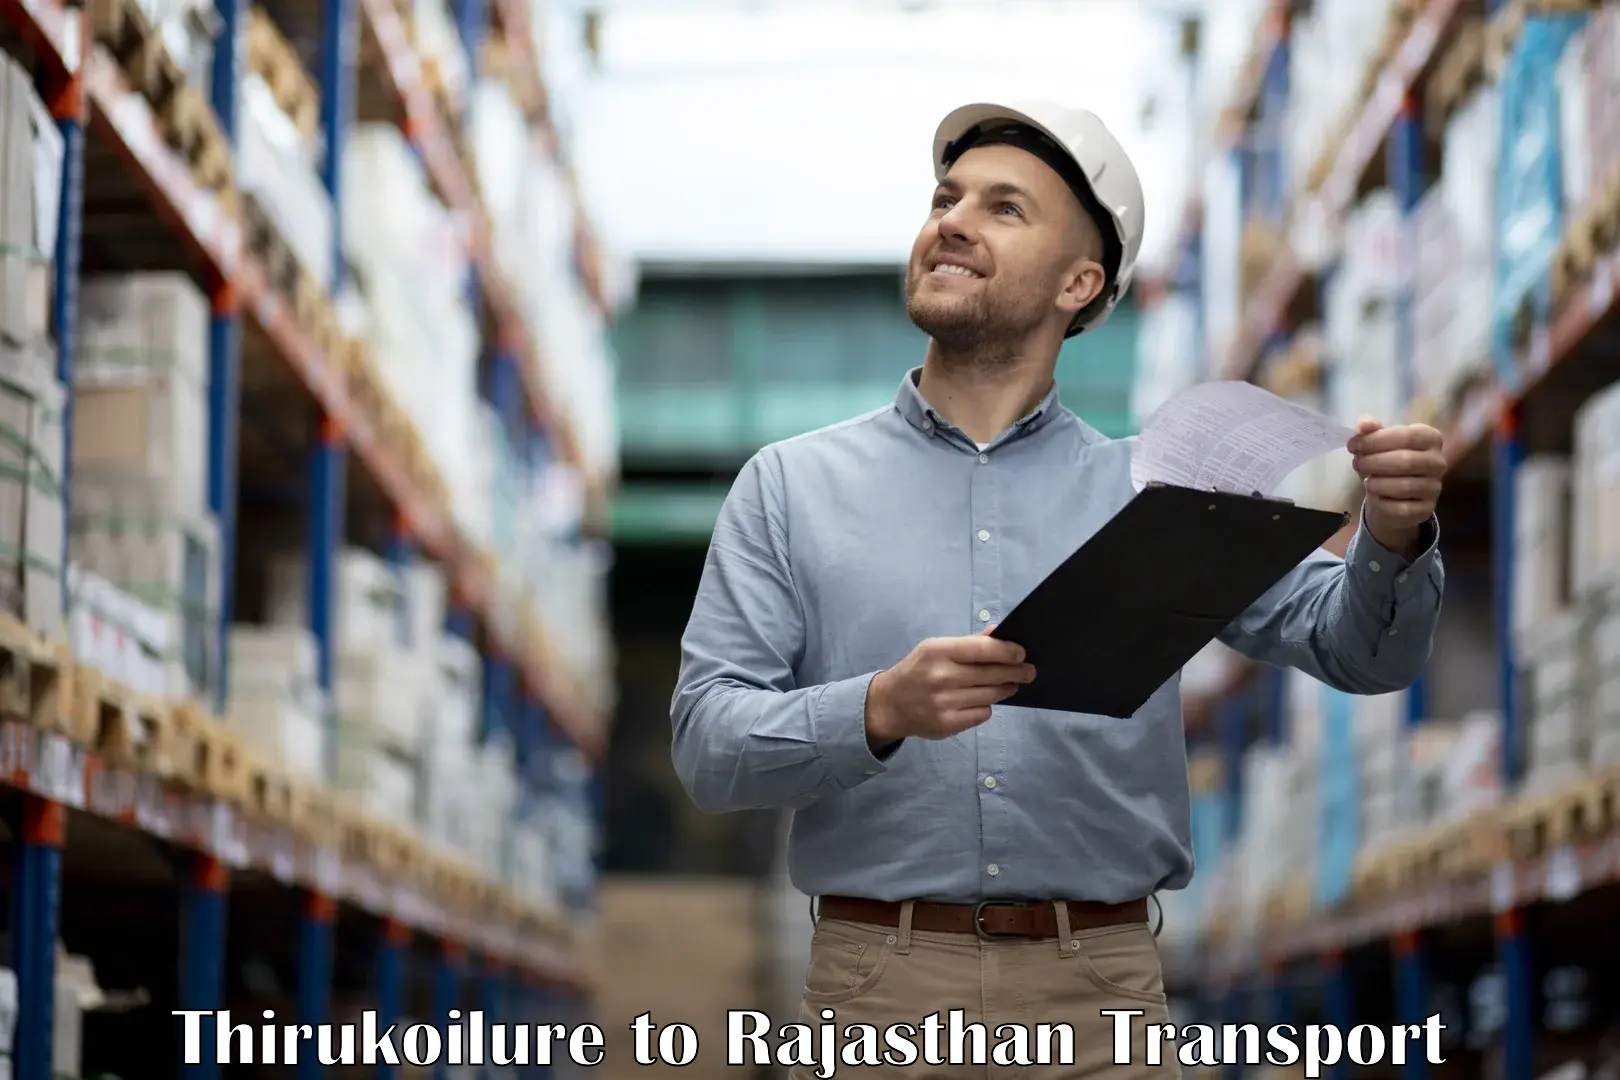 Parcel transport services Thirukoilure to Rajasthan